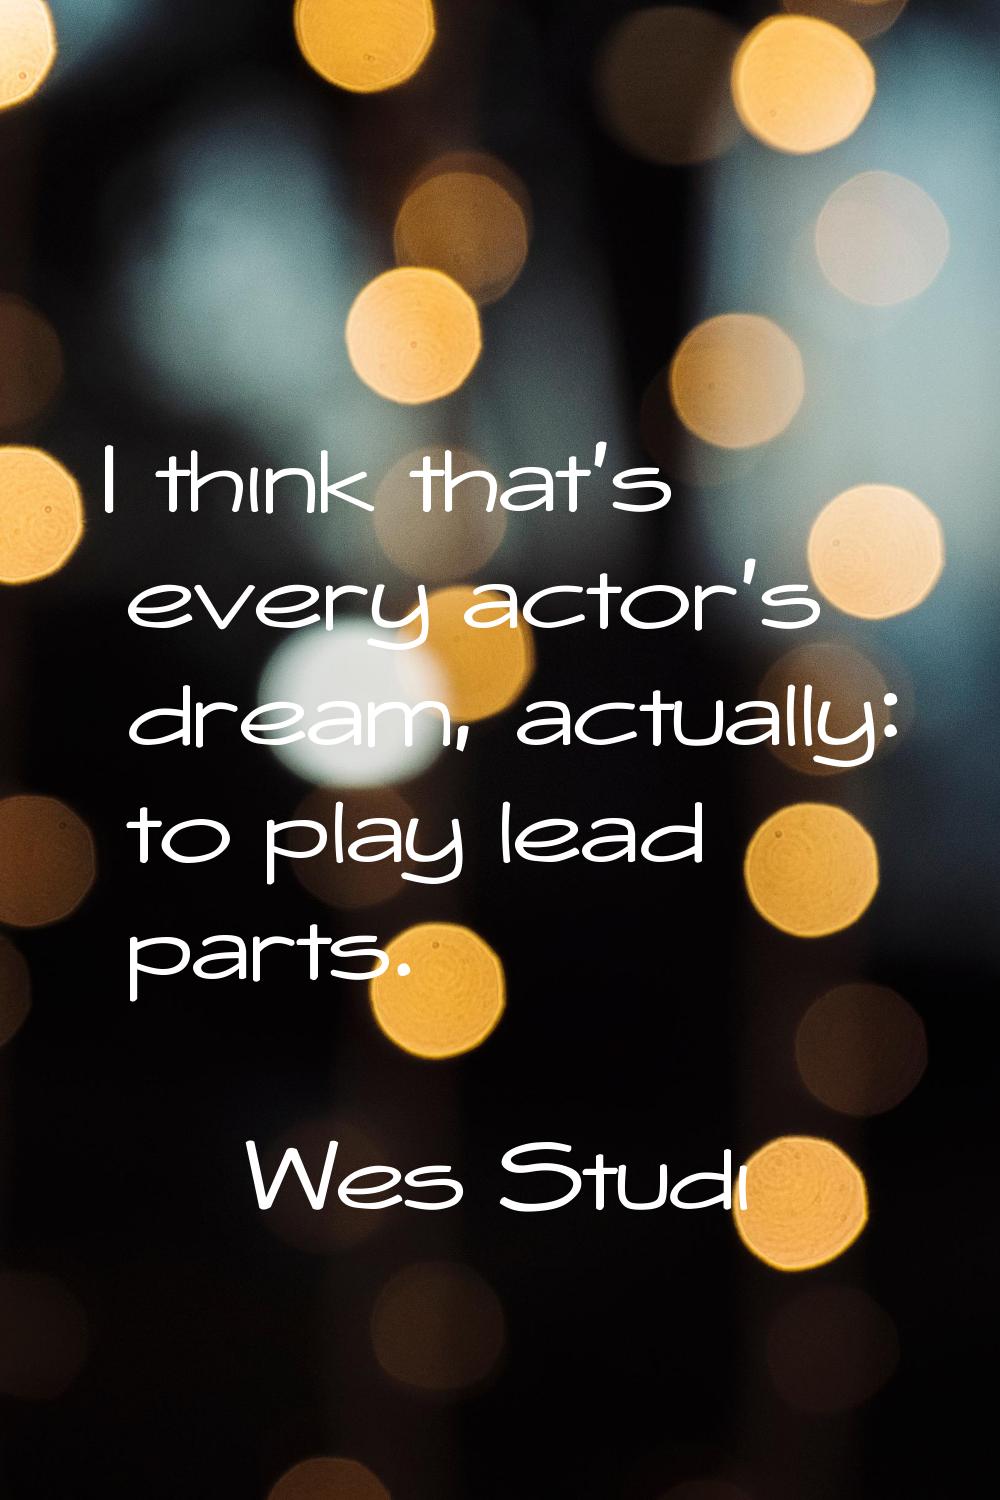 I think that's every actor's dream, actually: to play lead parts.